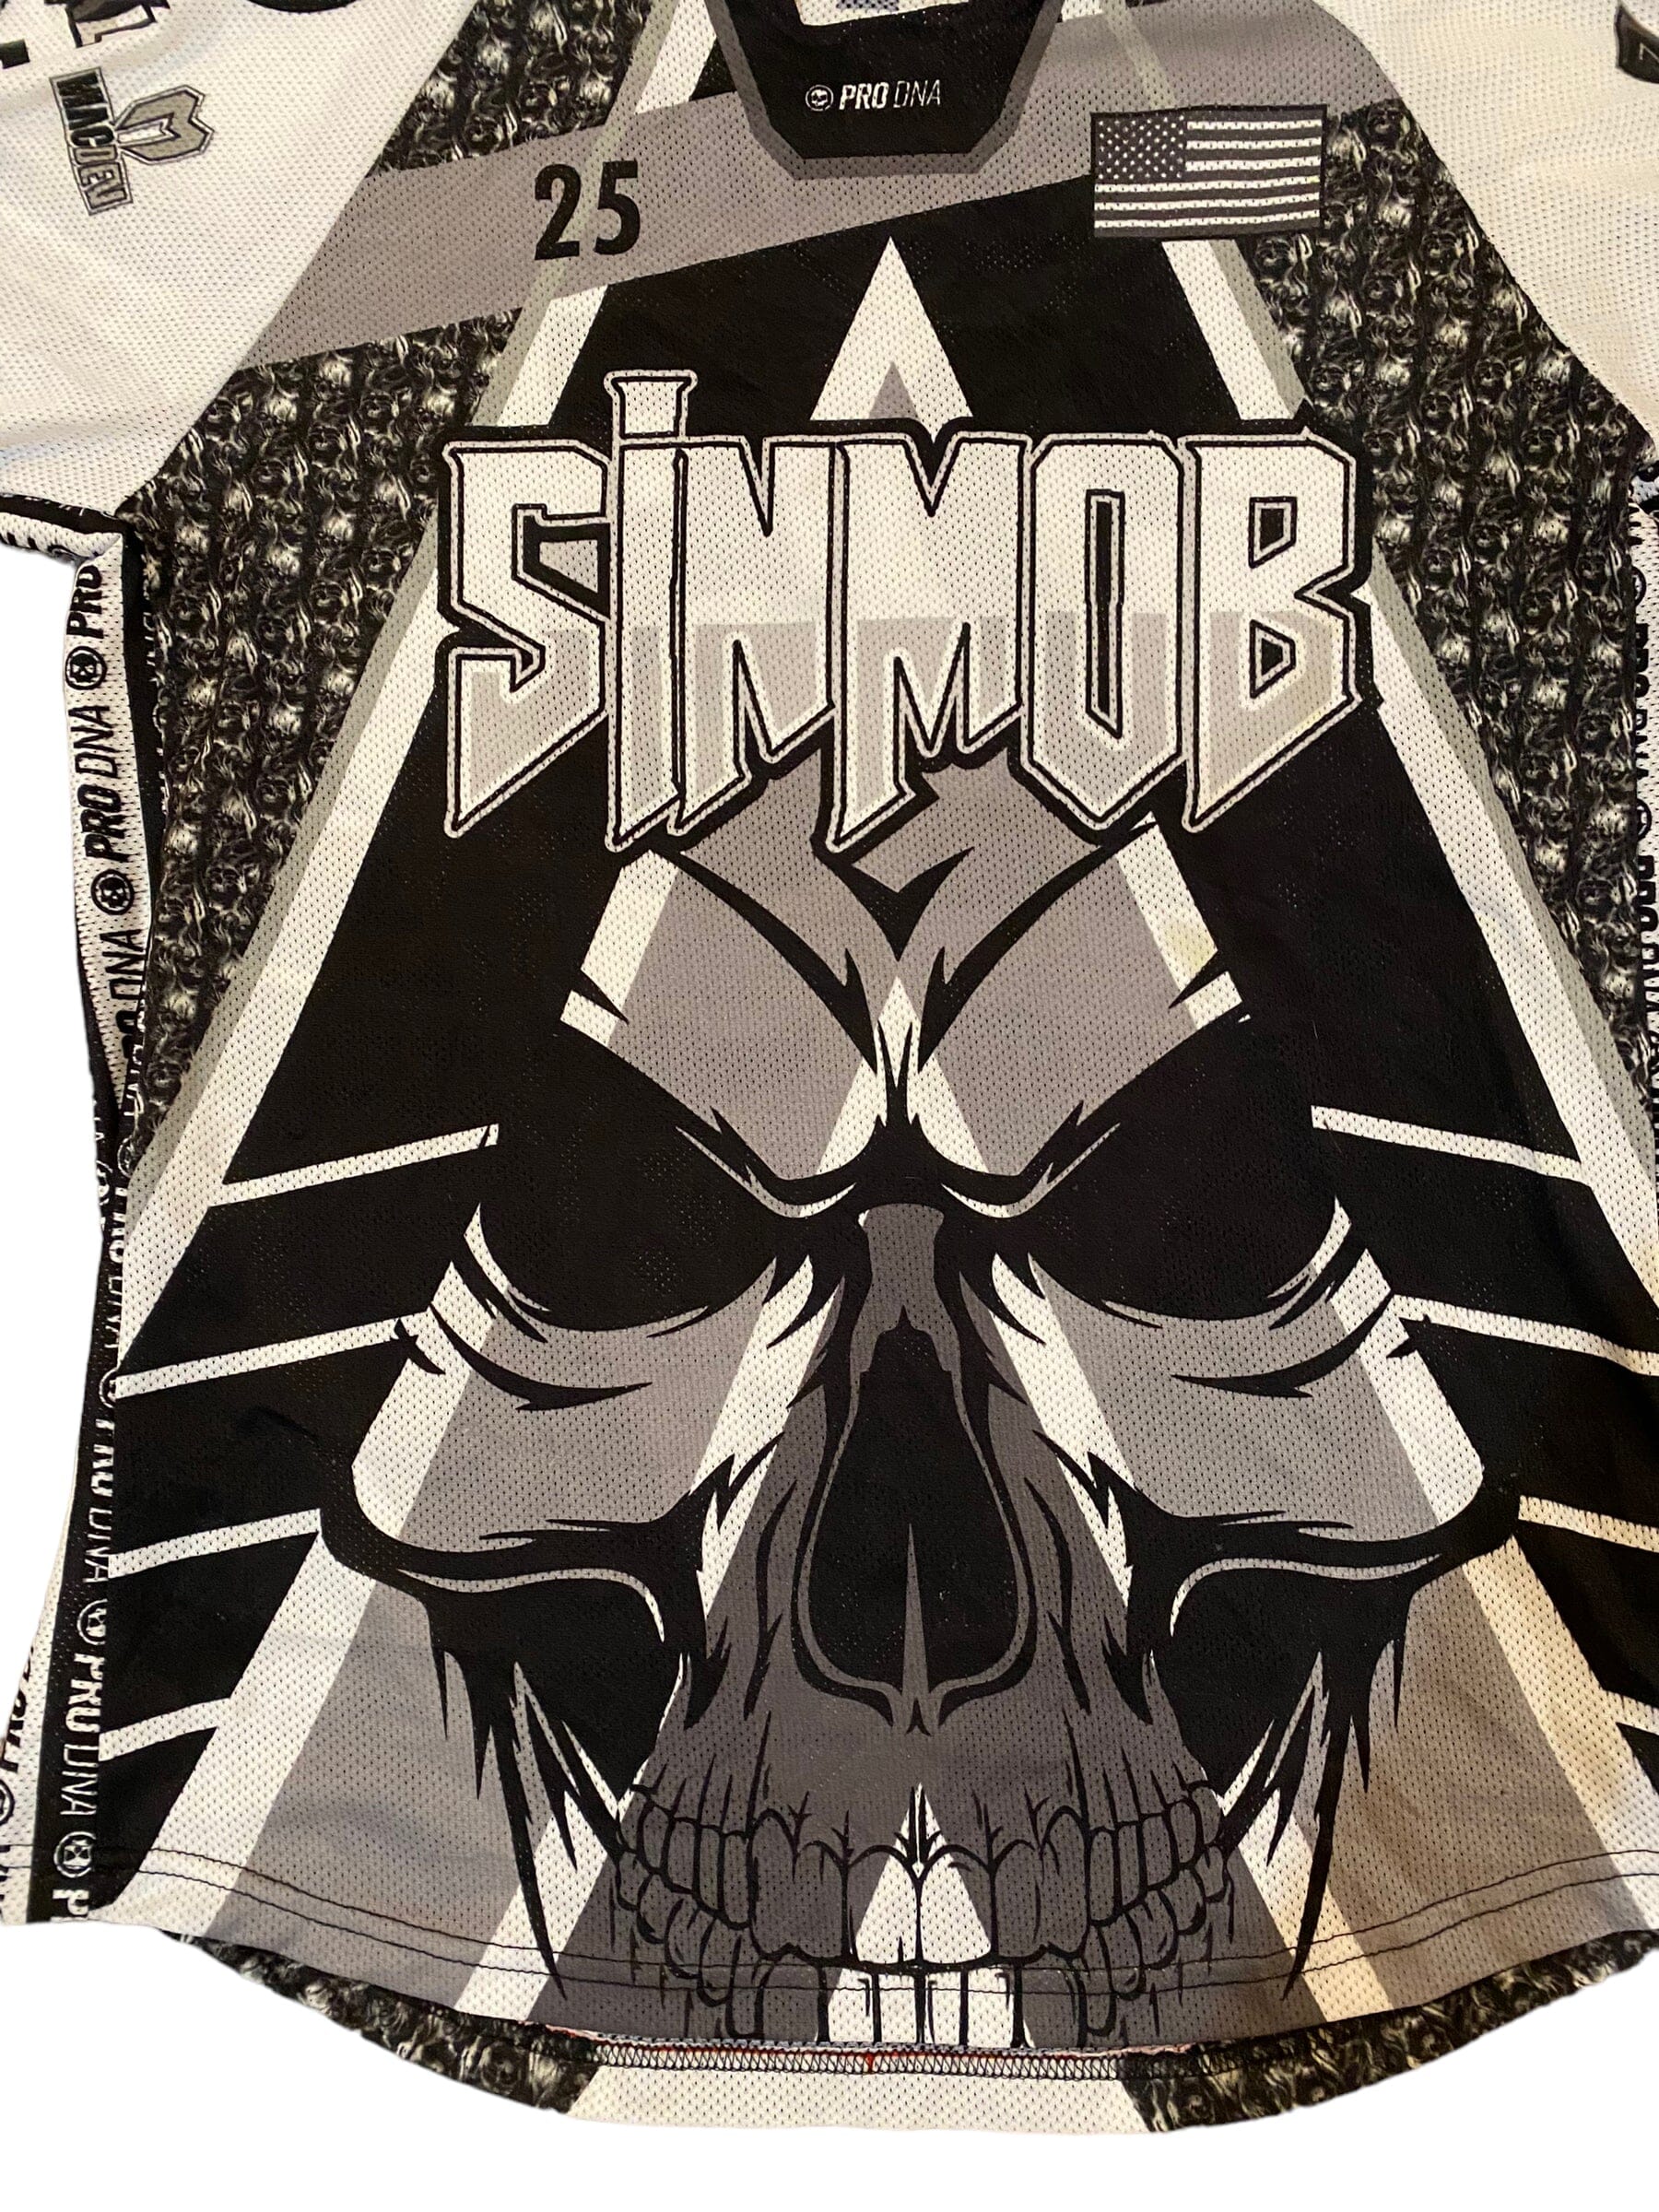 Used SinMob Paintball Jersey - size L Paintball Gun from CPXBrosPaintball Buy/Sell/Trade Paintball Markers, Paintball Hoppers, Paintball Masks, and Hormesis Headbands